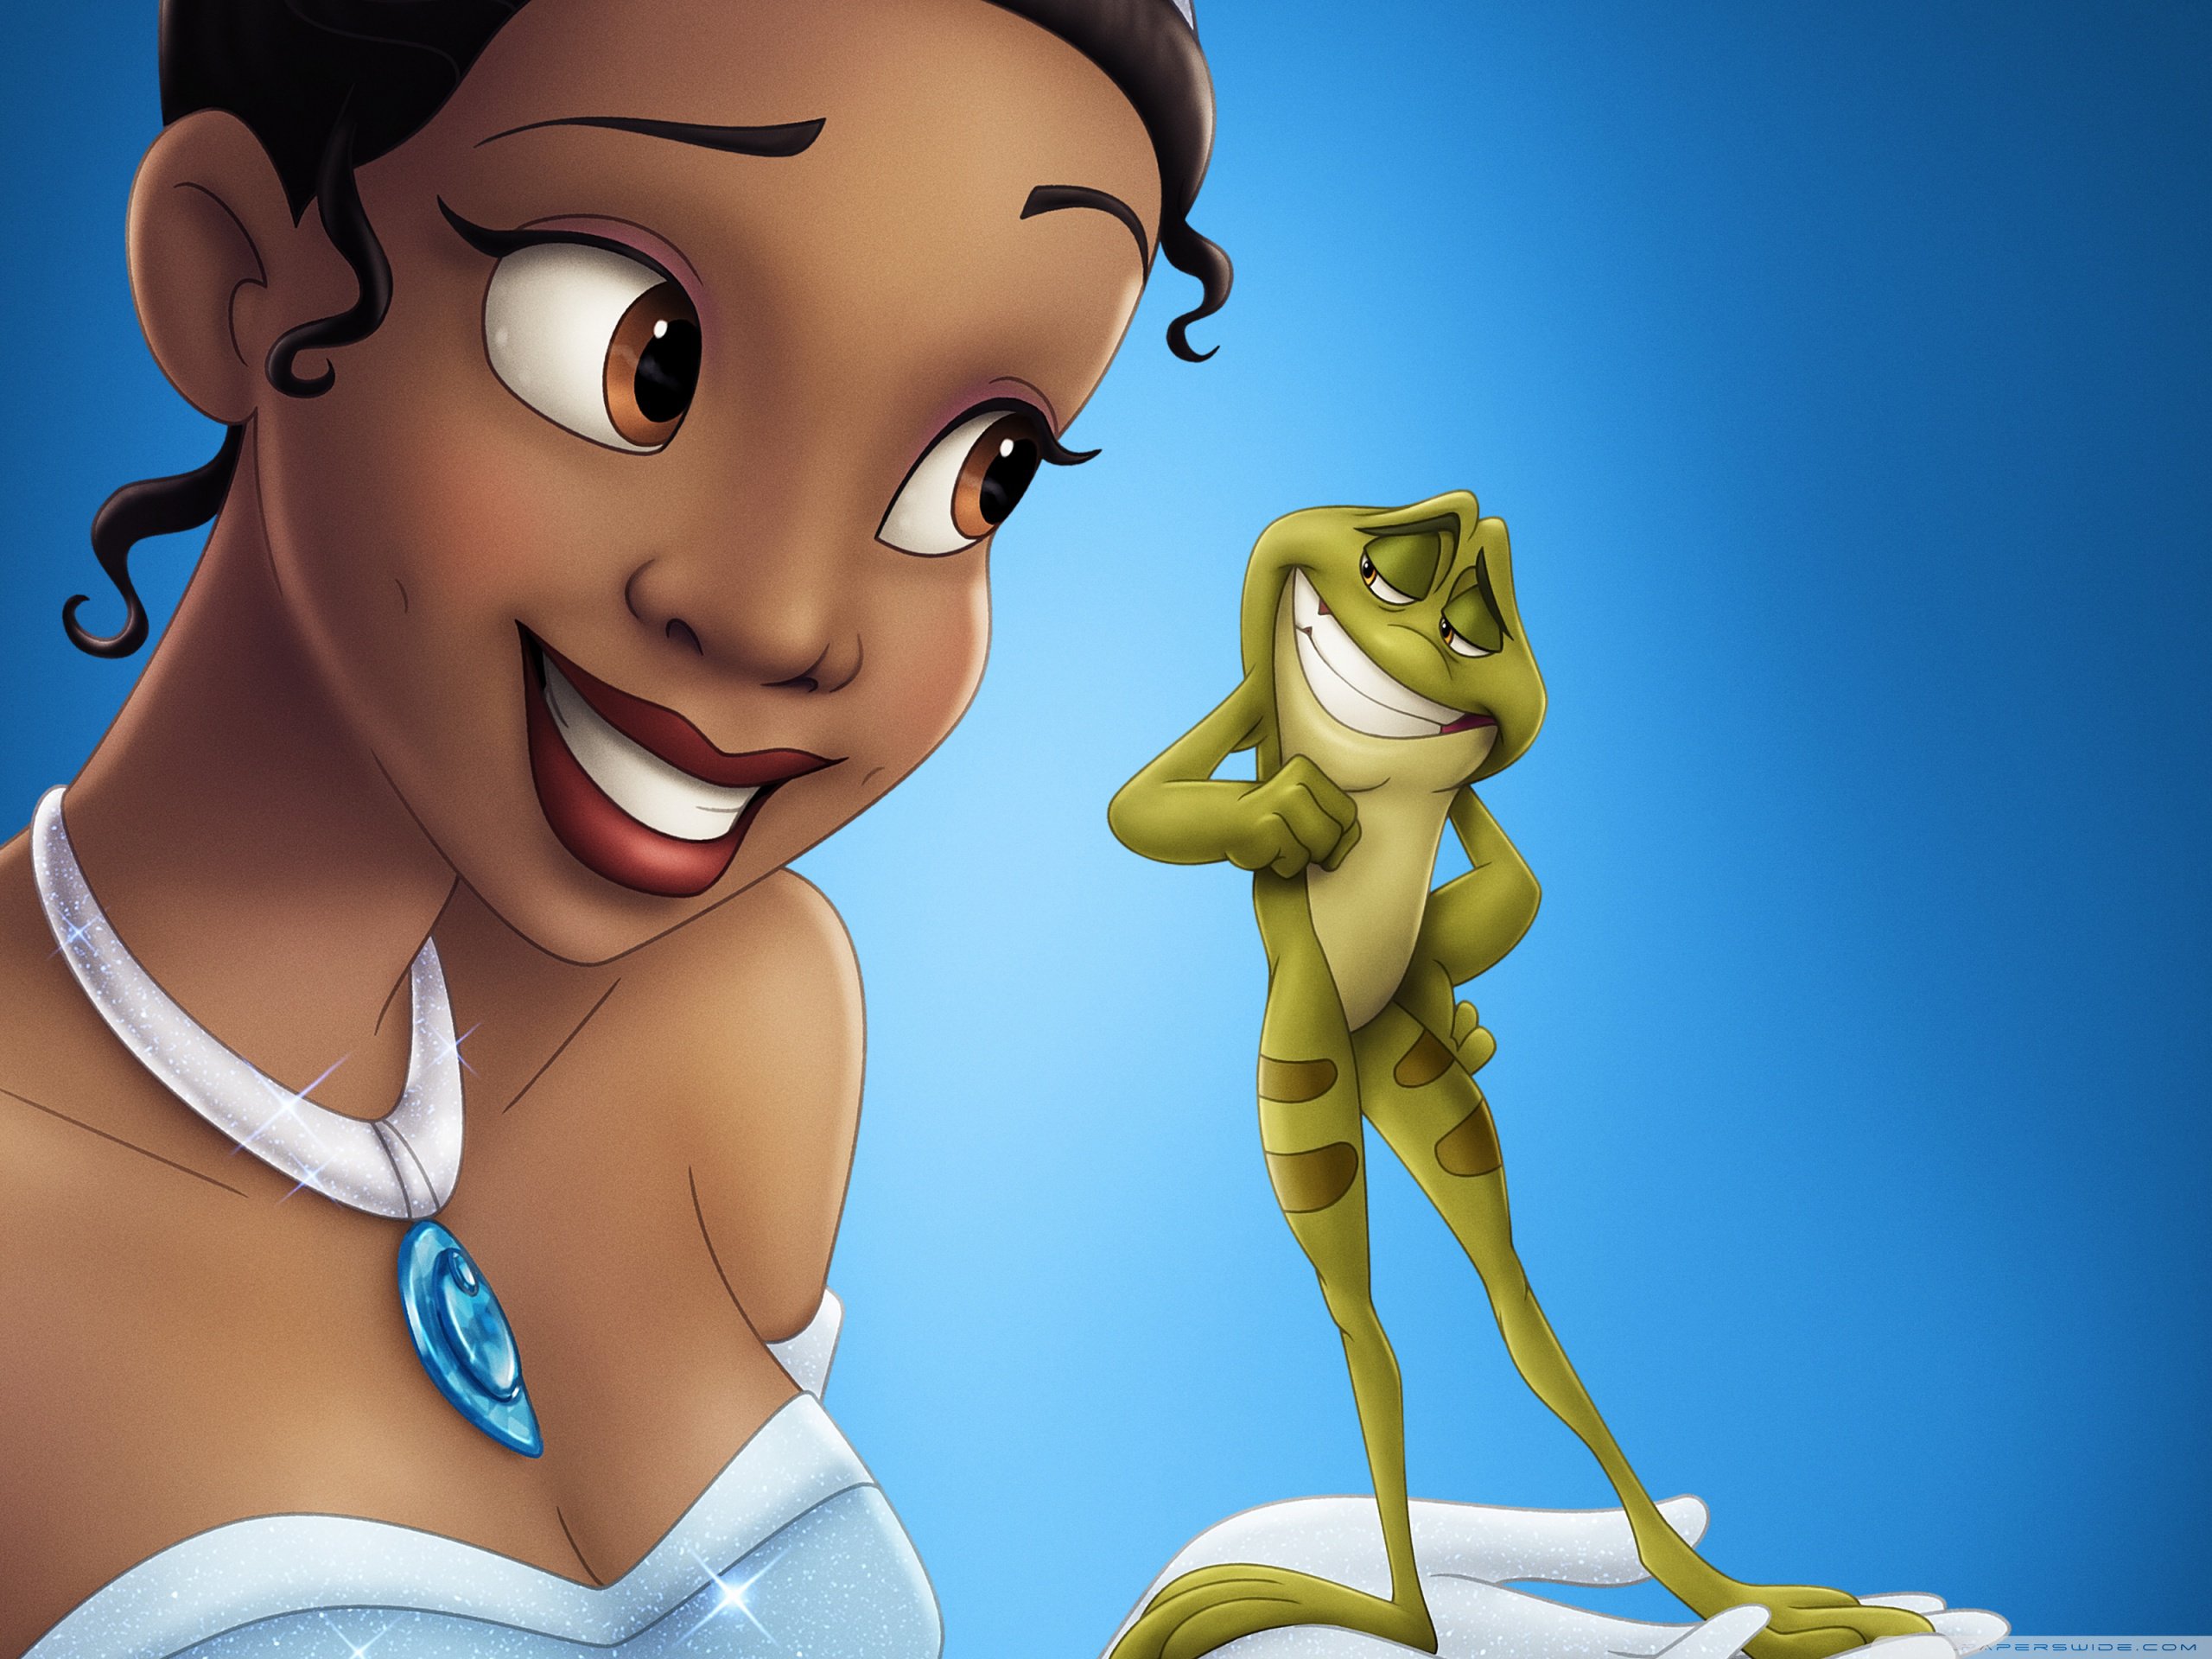 307430-the-princess-and-the-frog